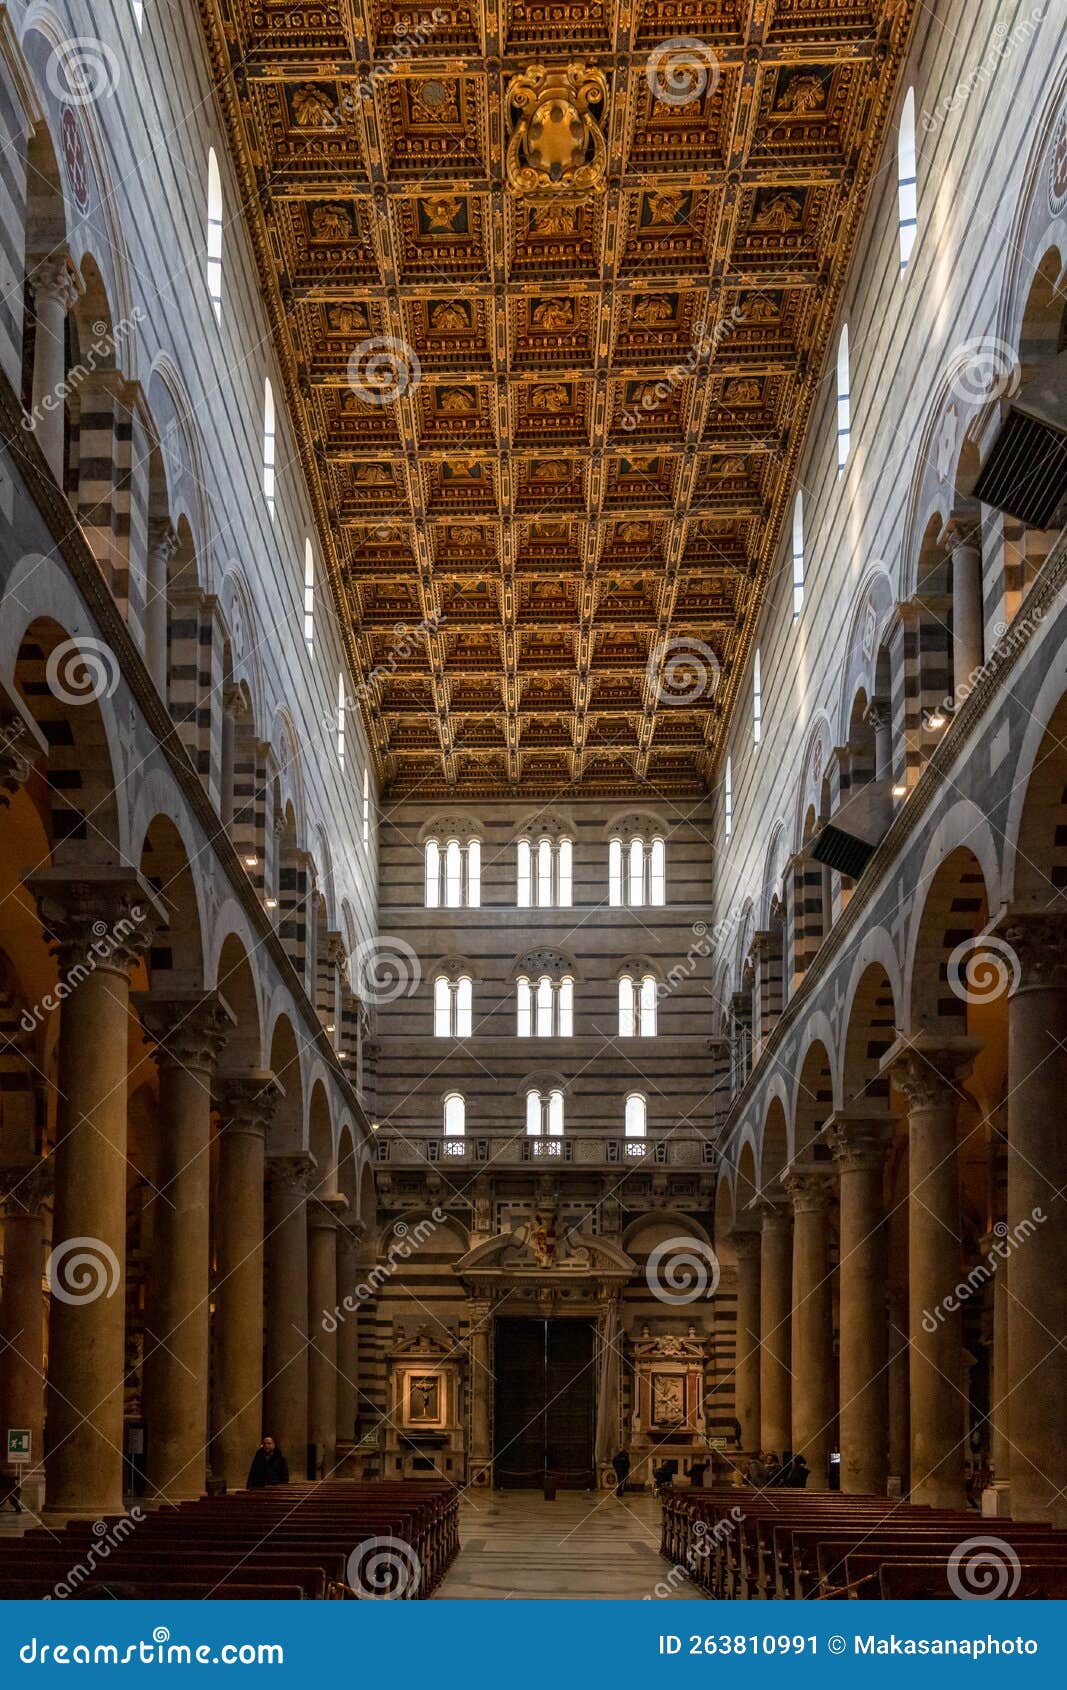 View of Ther Coffer Ceiling Inside the Medieval Pisa Cathedral Stock ...